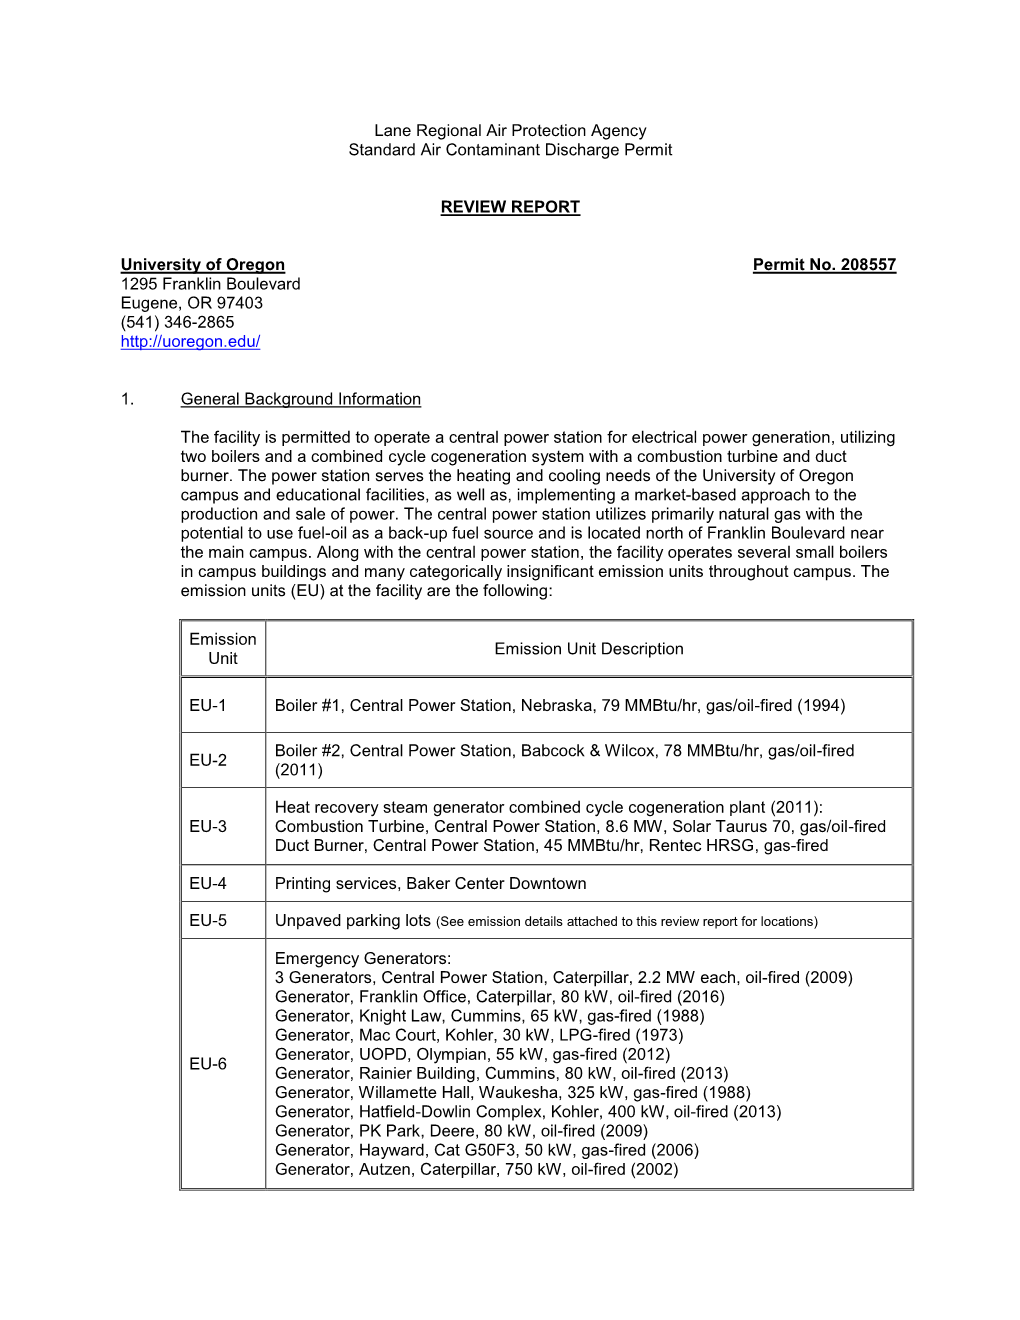 Lane Regional Air Protection Agency Standard Air Contaminant Discharge Permit